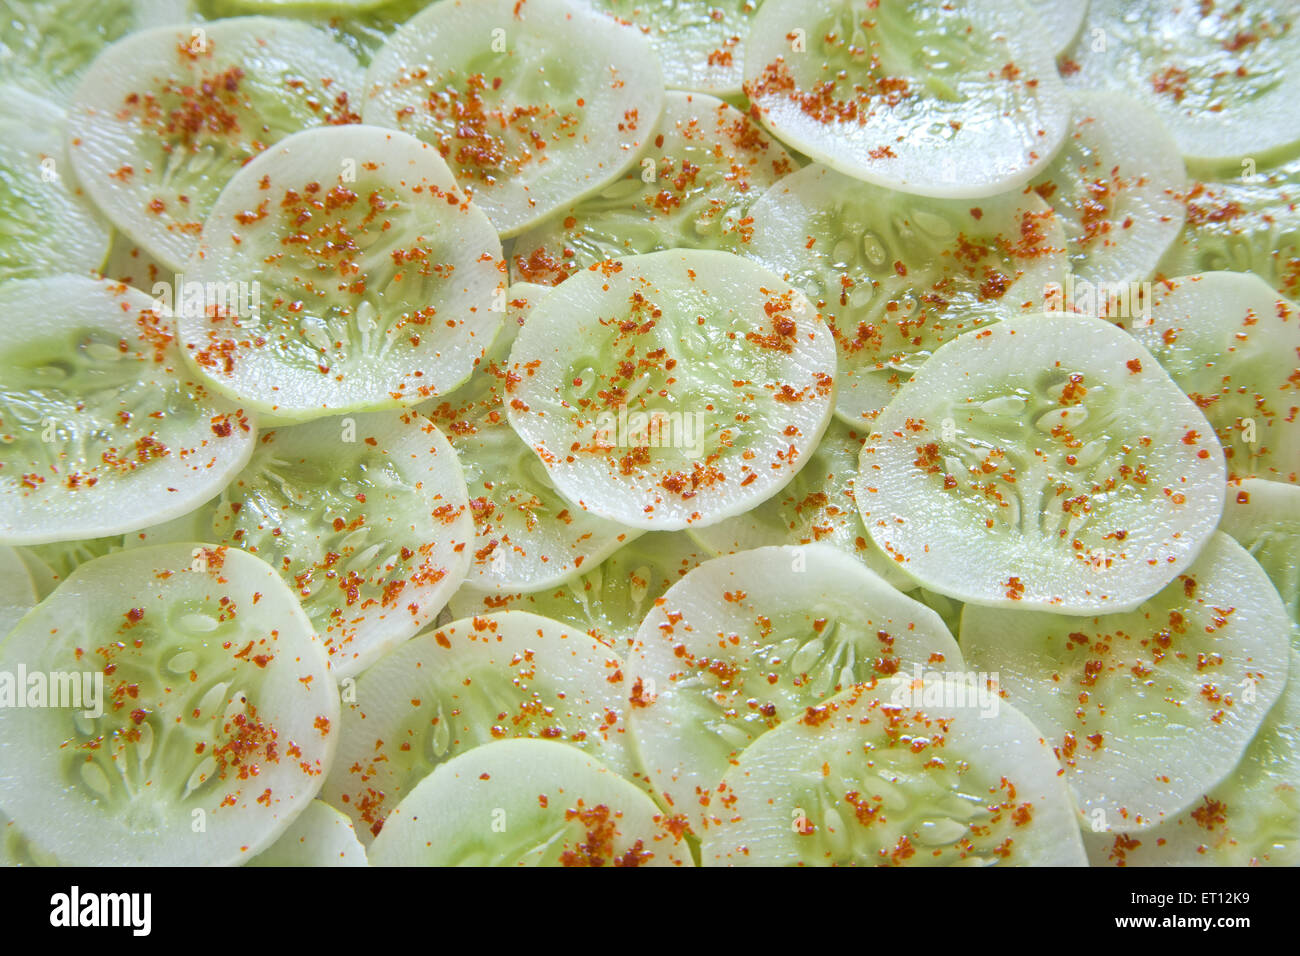 Cucumber slices with masala 14 May 2010 Stock Photo